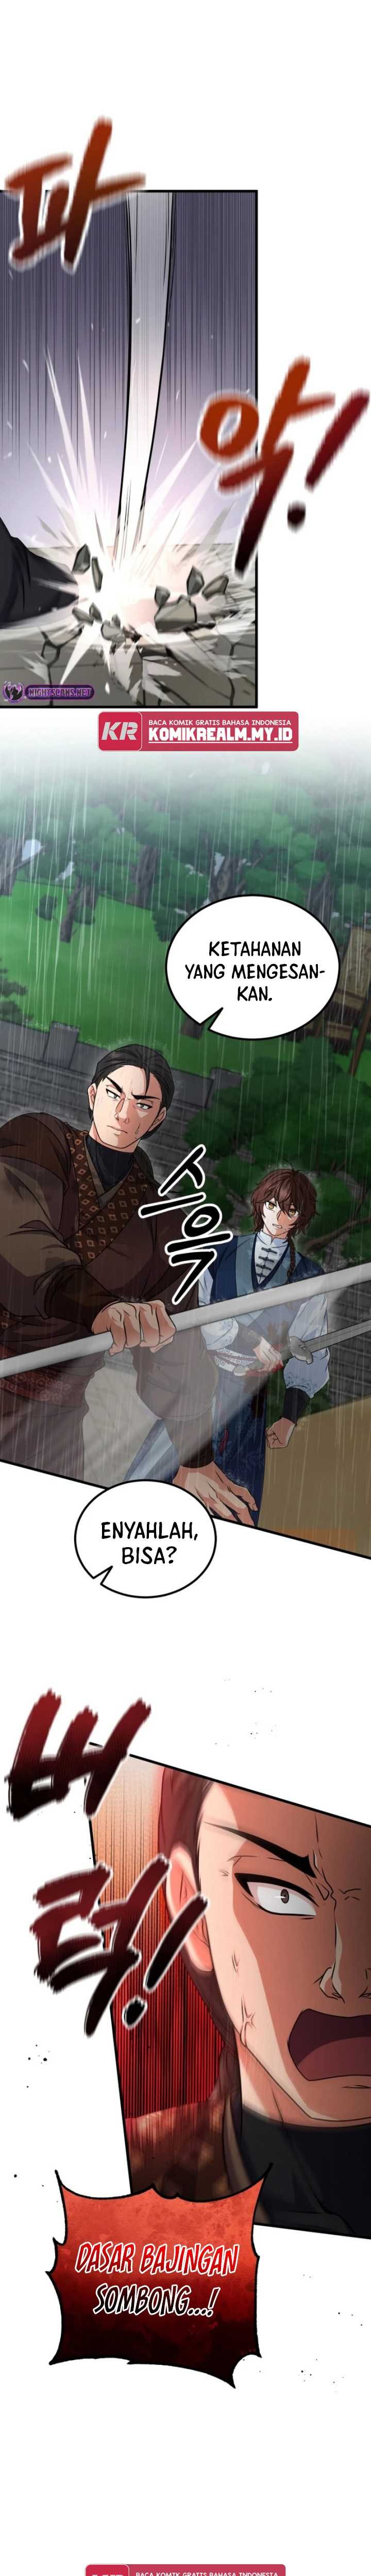 Regression Of The Shattering Sword Chapter 22